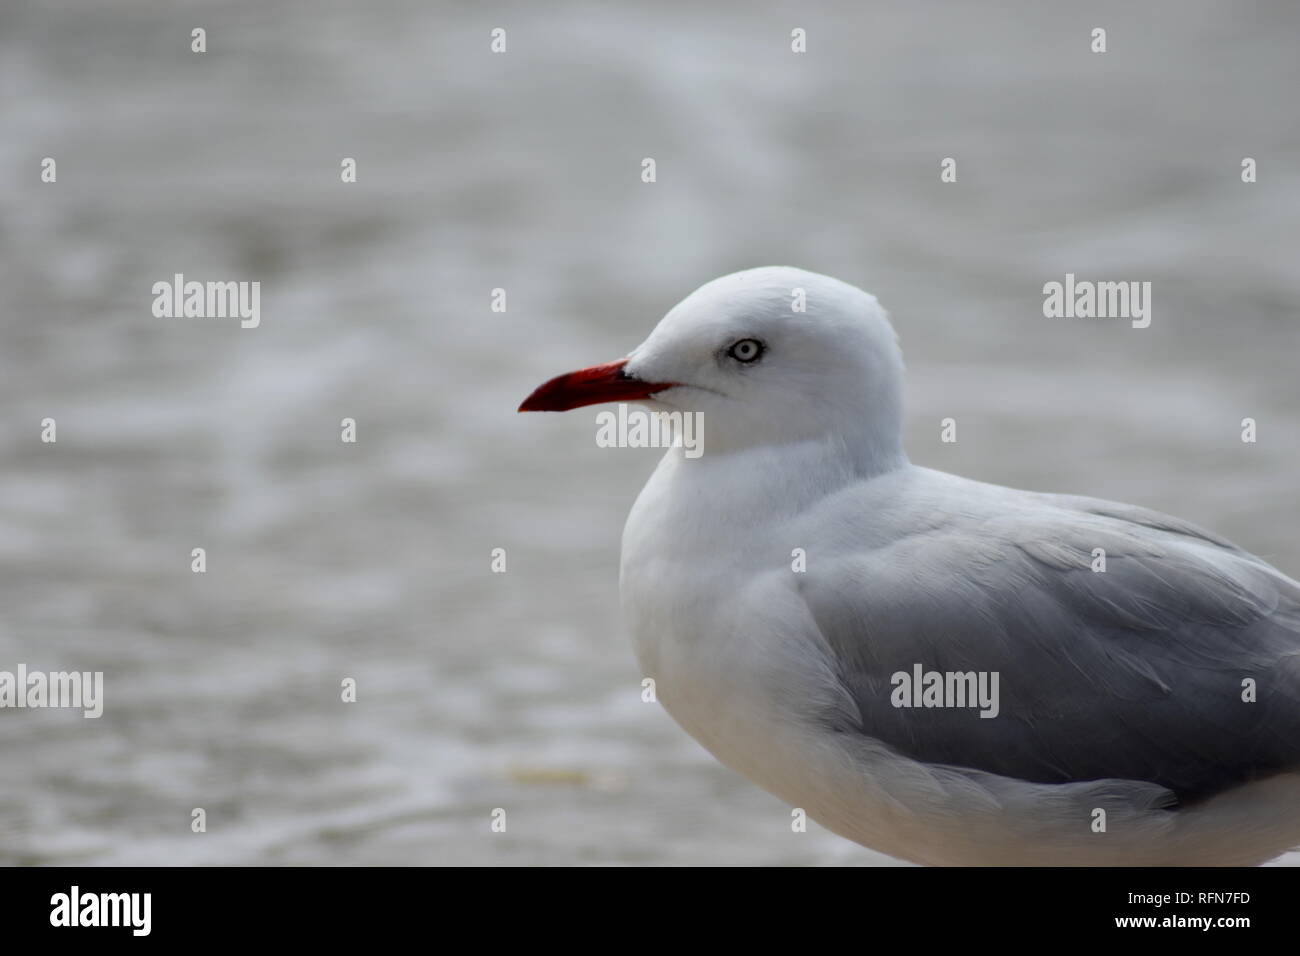 Close- up profile of Red Billed Seagull Stock Photo